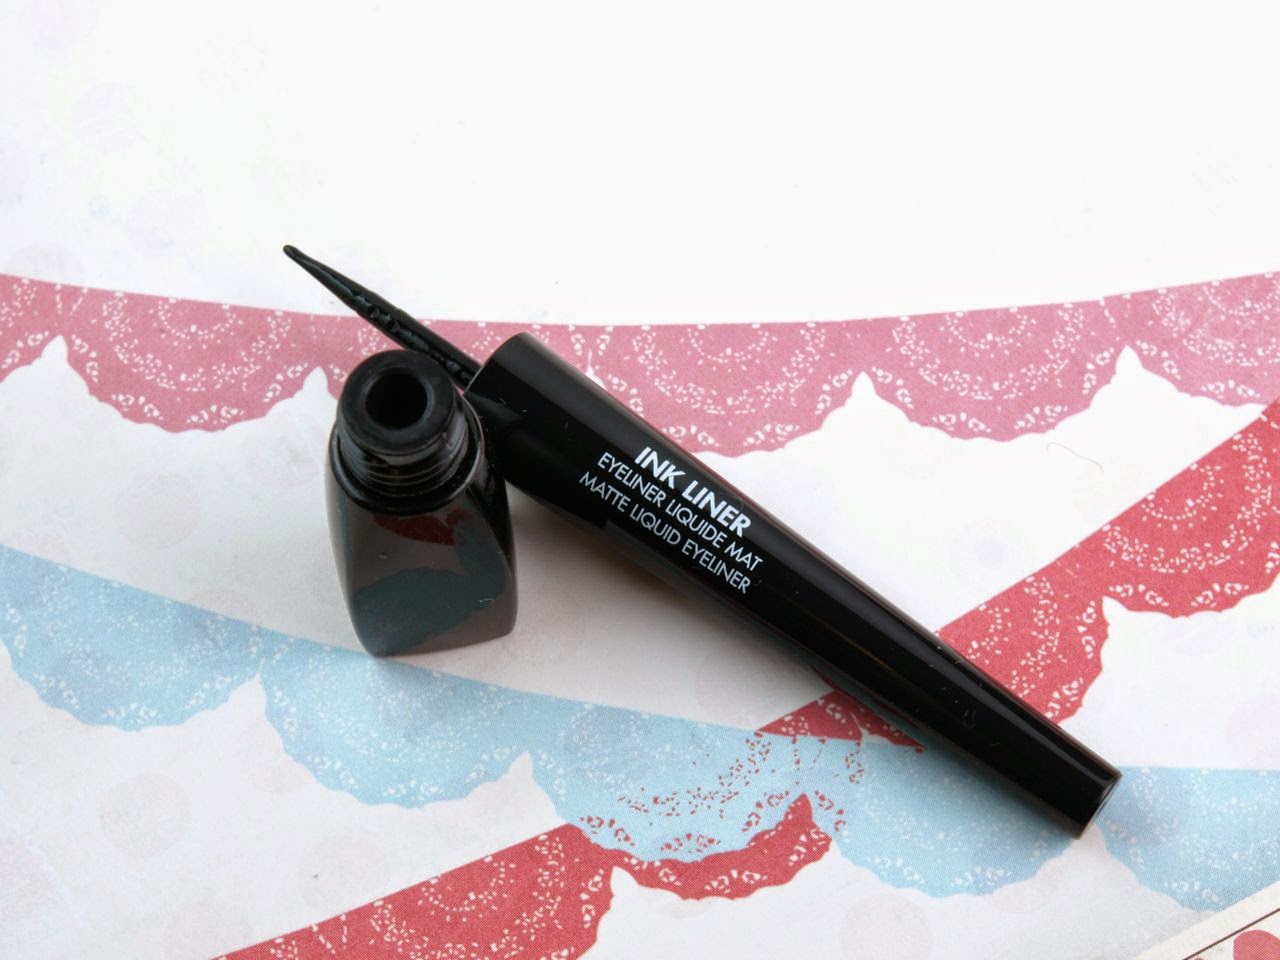 Make Up For Ever Angled Eyeliner Brush 262: Review  The Happy Sloths:  Beauty, Makeup, and Skincare Blog with Reviews and Swatches